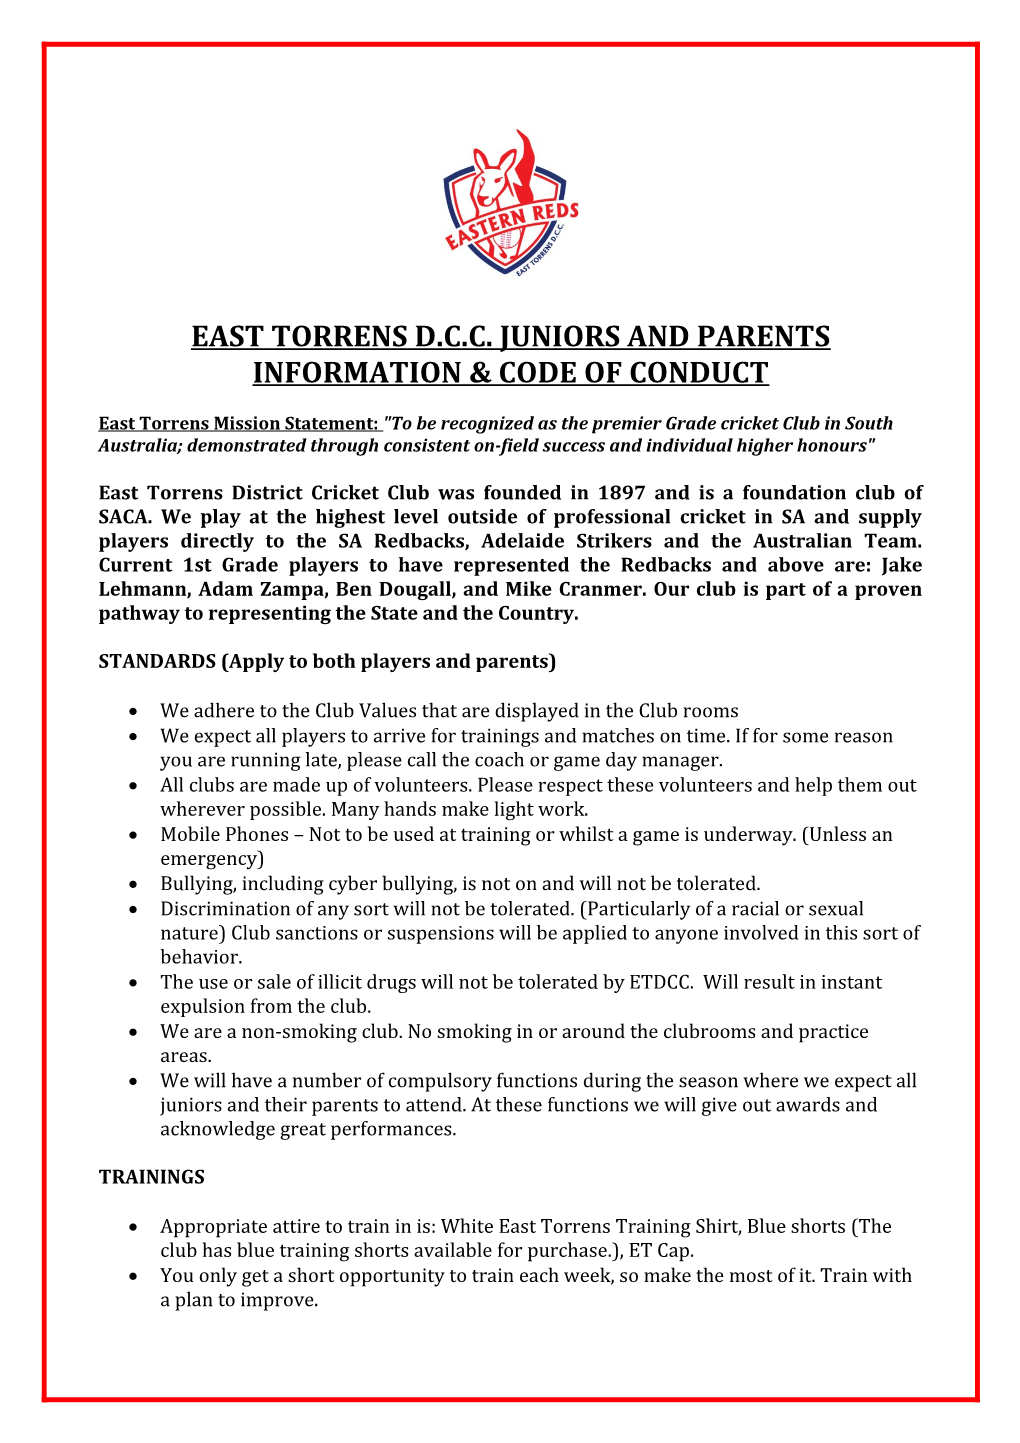 East Torrens D.C.C. Juniors and Parents Information & Code of Conduct